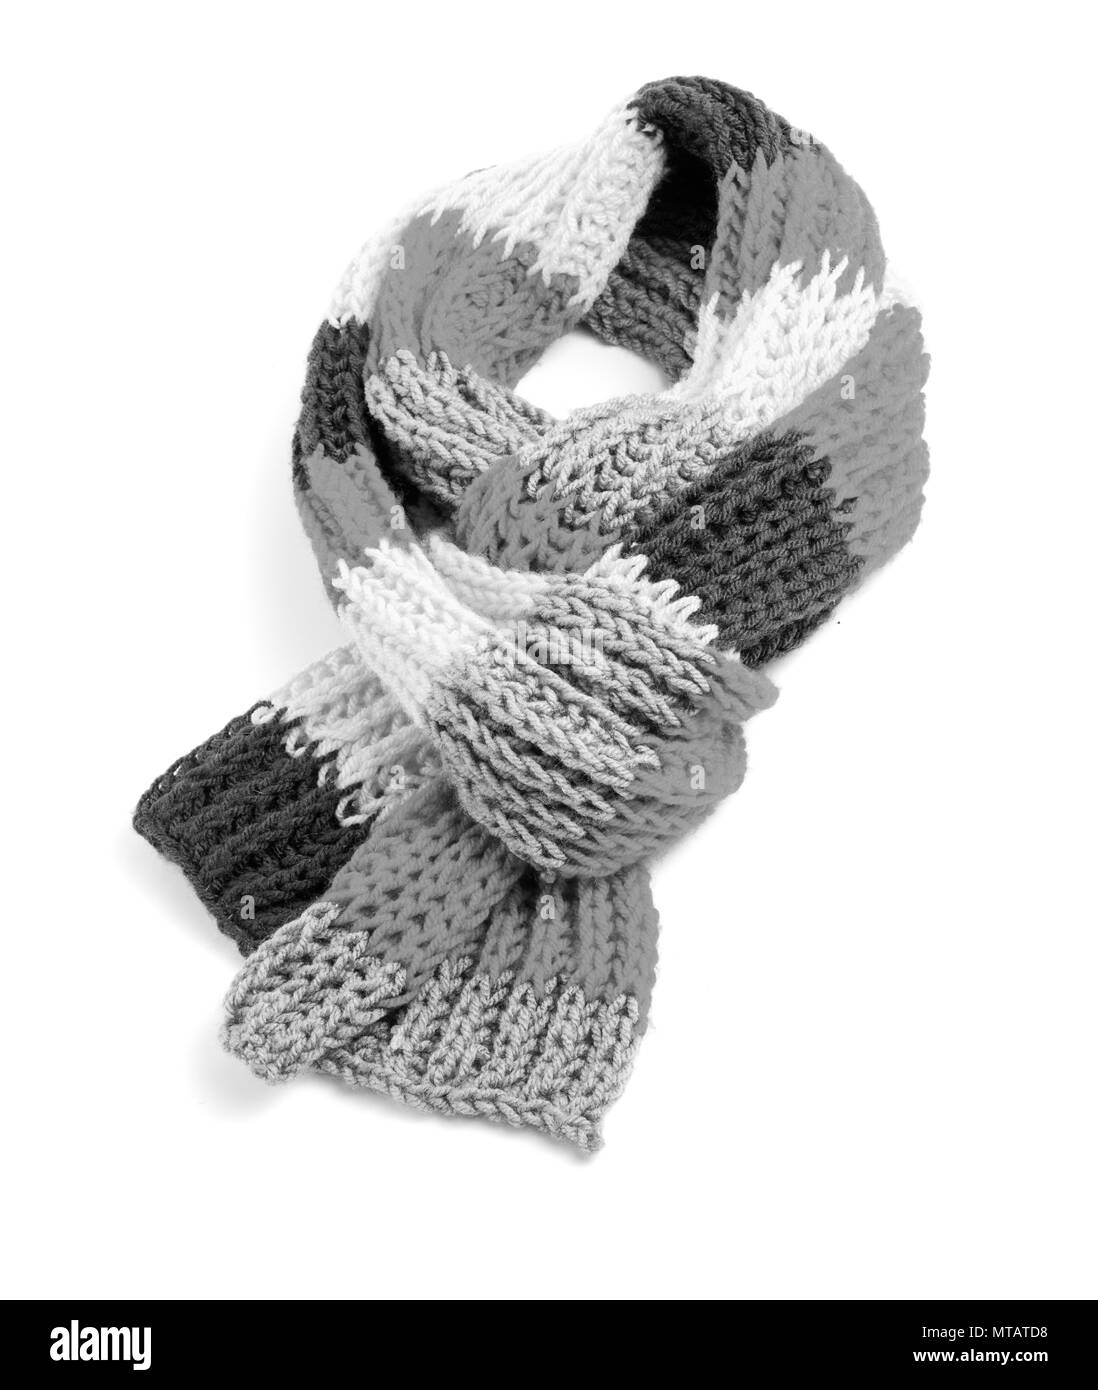 Black and white striped scarf isolated on a white background Stock Photo